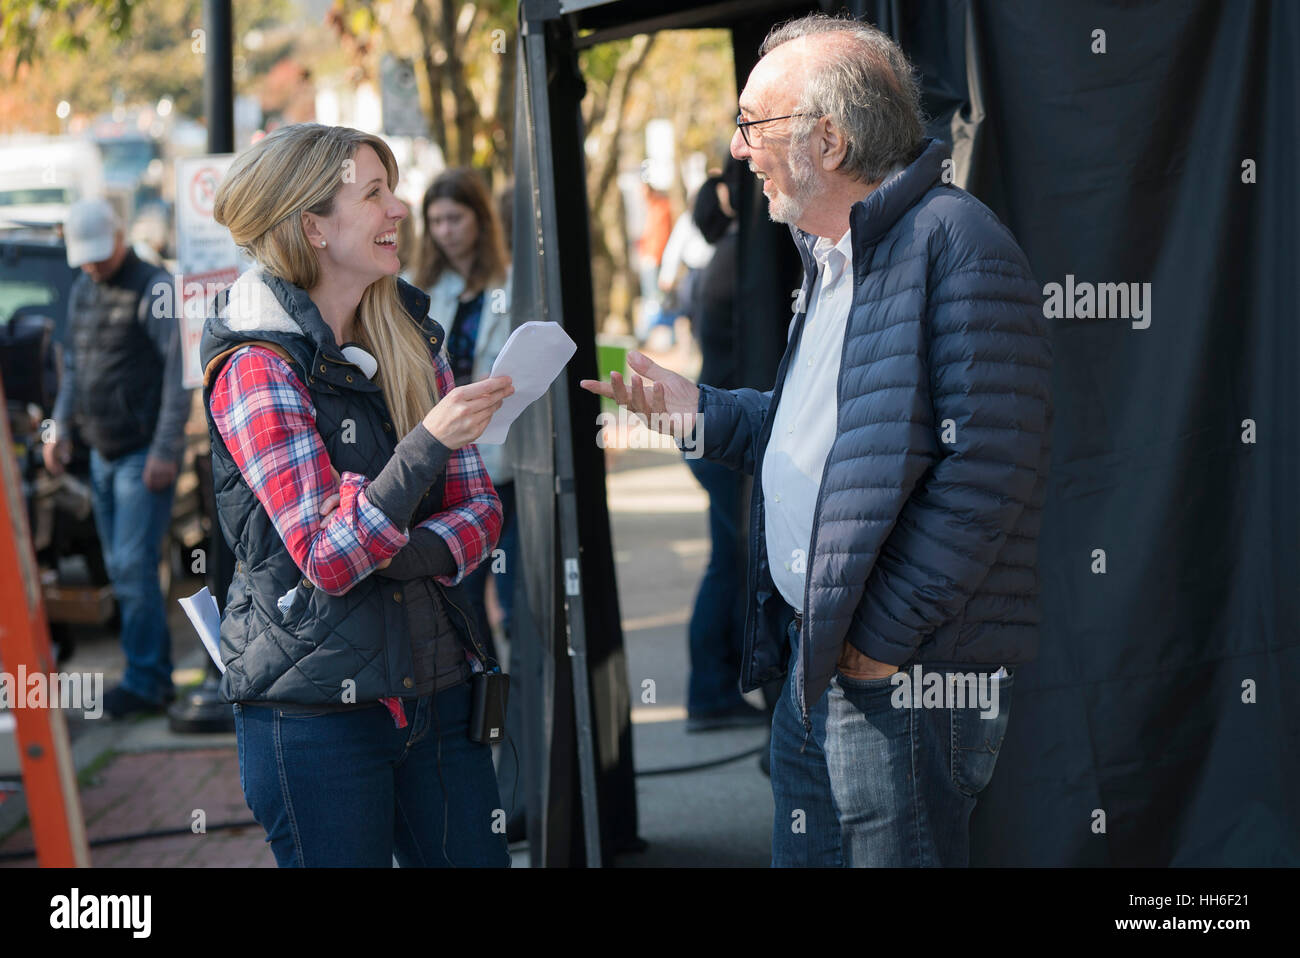 RELEASE DATE: November 18, 2016 TITLE: The Edge of Seventeen STUDIO: Sony Pictures DIRECTOR: Kelly Fremon Craig PLOT: High-school life gets even more unbearable for Nadine when her best friend, Krista, starts dating her older brother STARRING: James L. Brooks, Kelly Fremon Craig on set (Credit: © Sony Pictures/Entertainment Pictures) Stock Photo